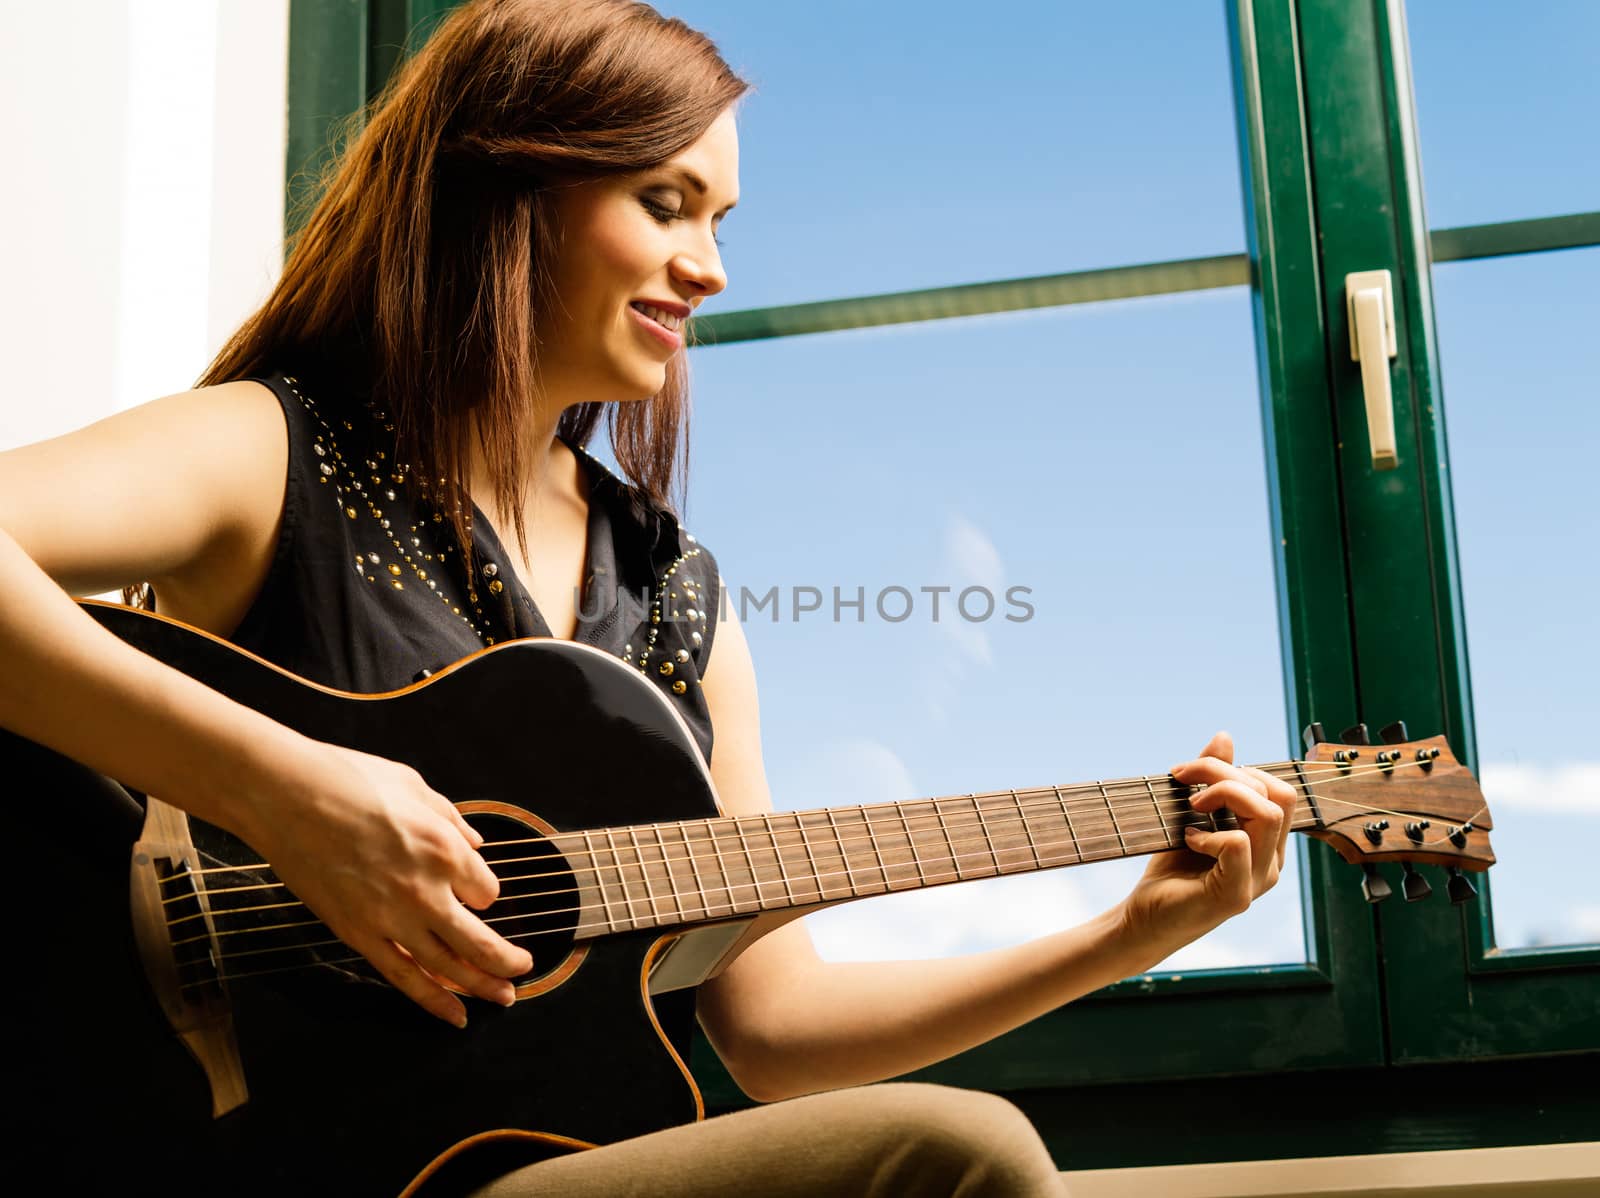 Smiling woman playing guitar by a window by sumners